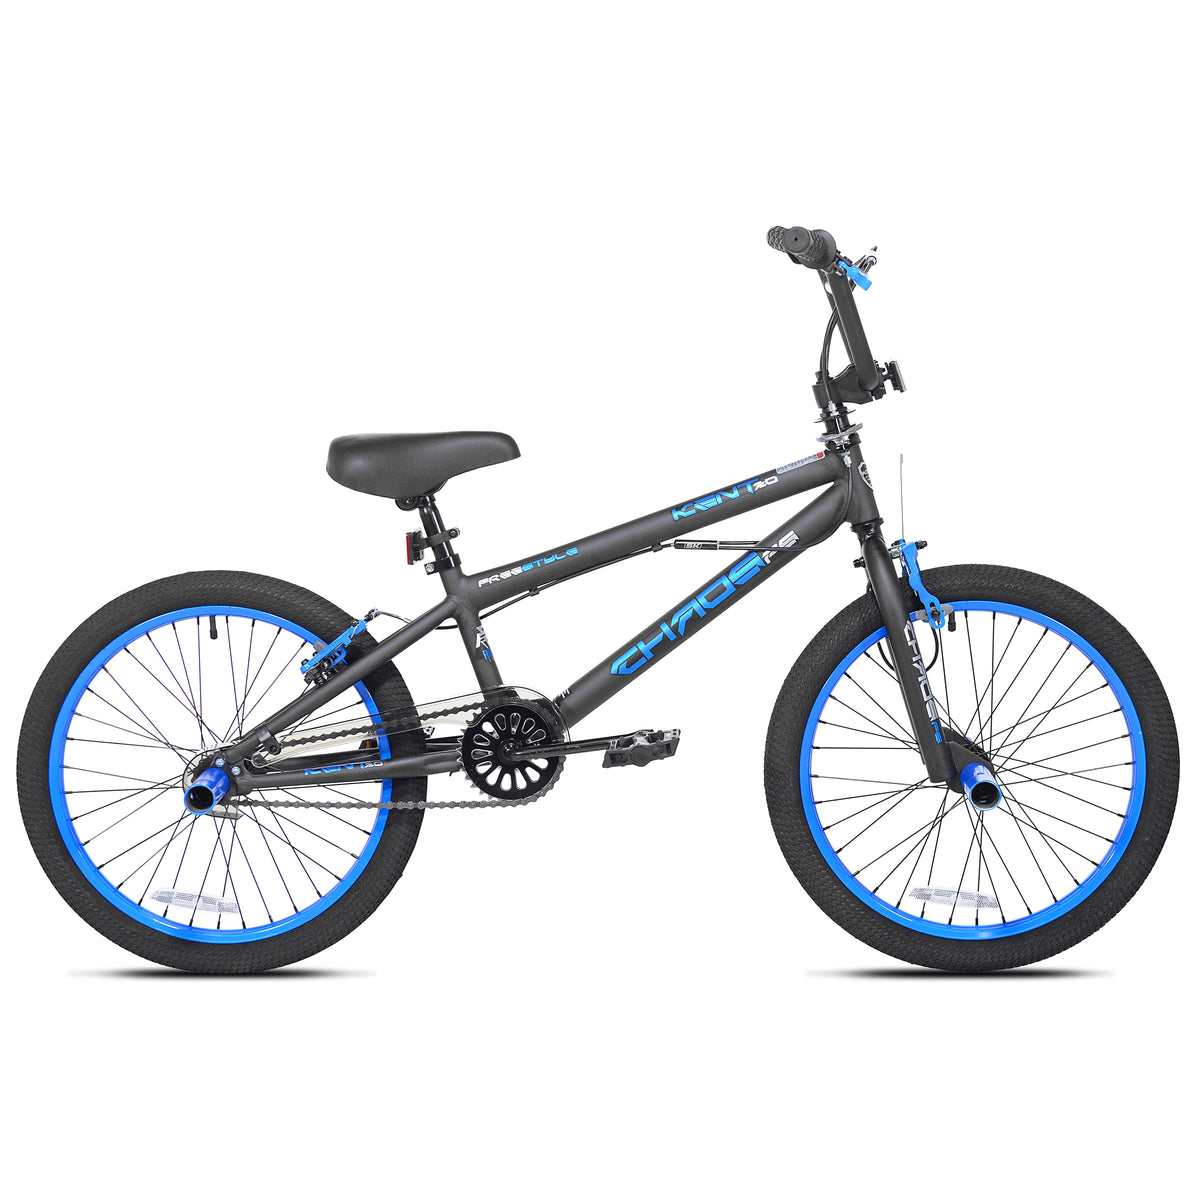 20" Kent Chaos | Bike for Kids Ages 7-13